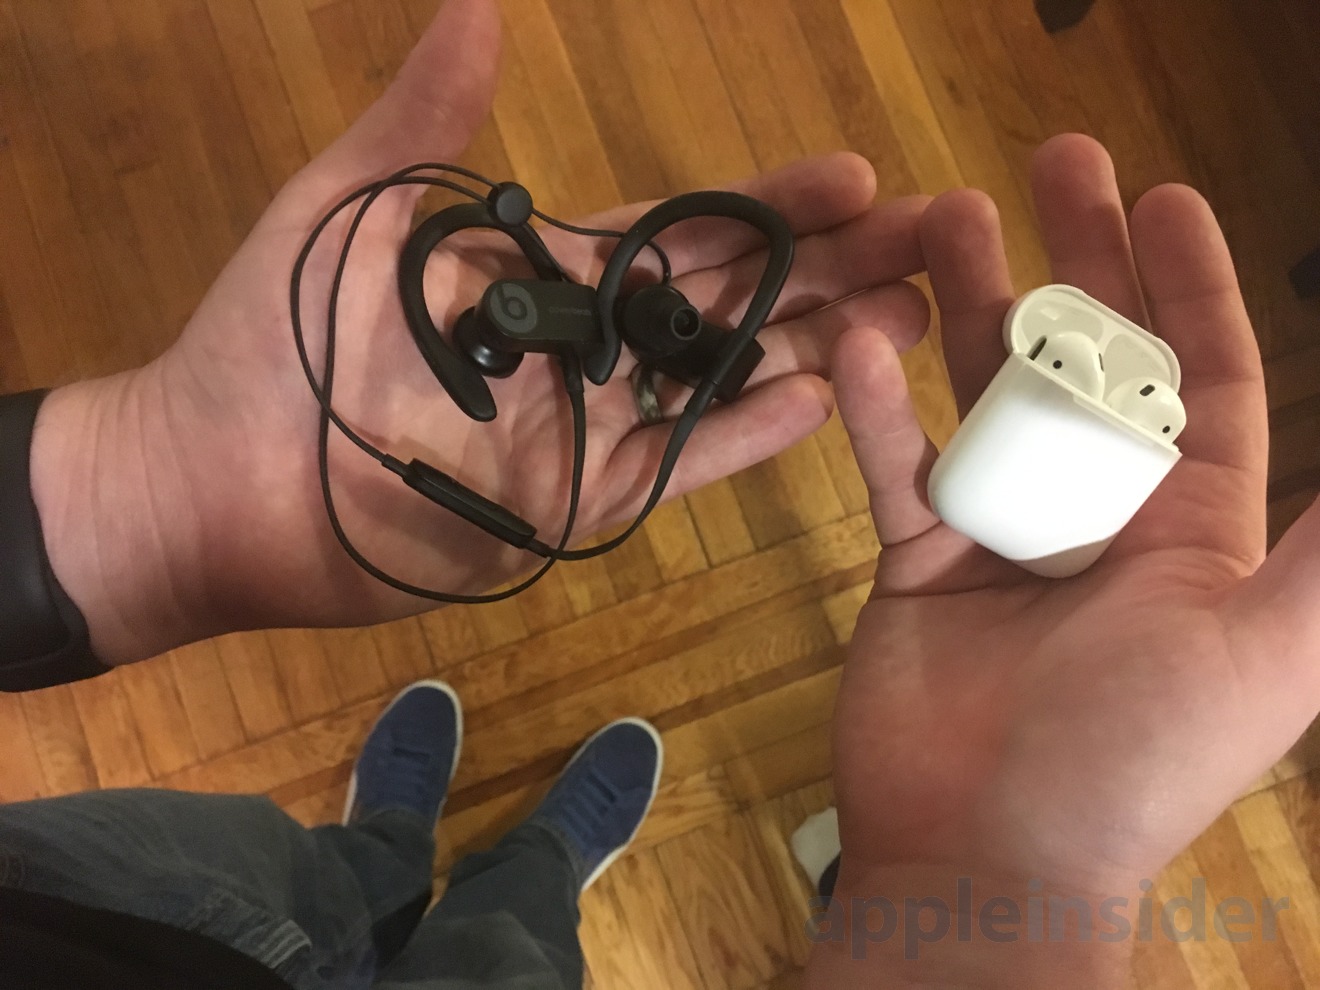 photo of AirPods vs. Powerbeats3: Which Apple W1 headphones are better for working out and exercising? image